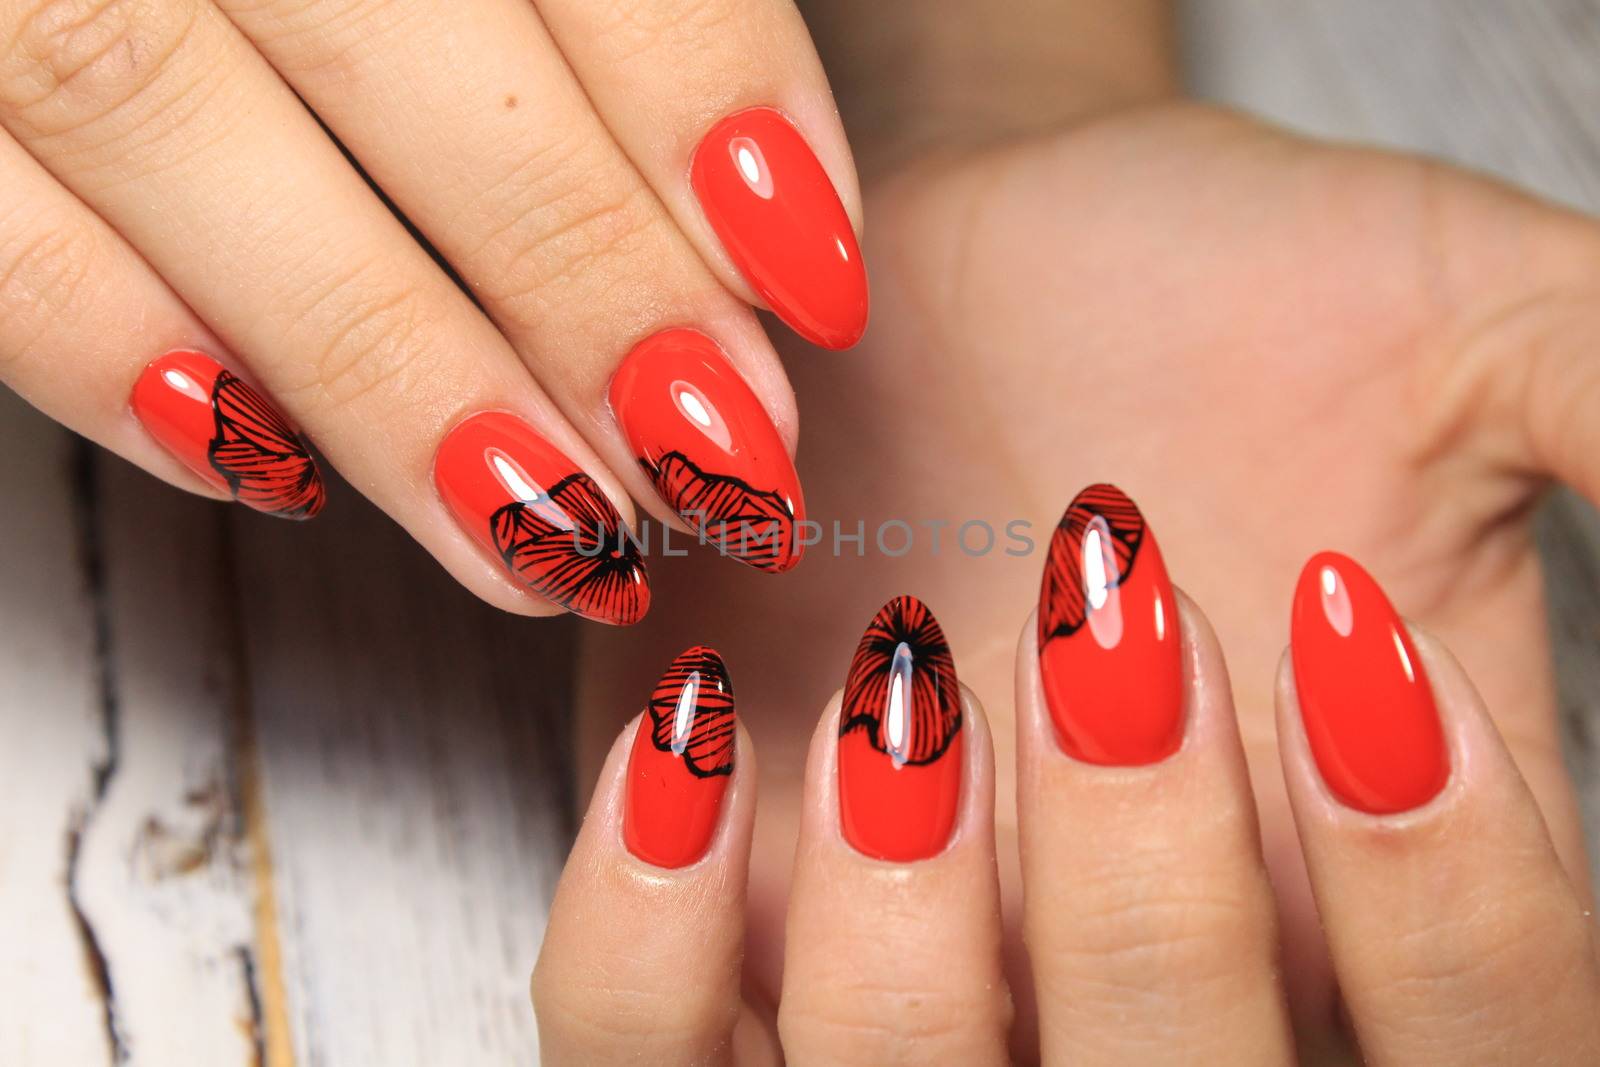 Manicured nails Nail Polish art design. Best by SmirMaxStock